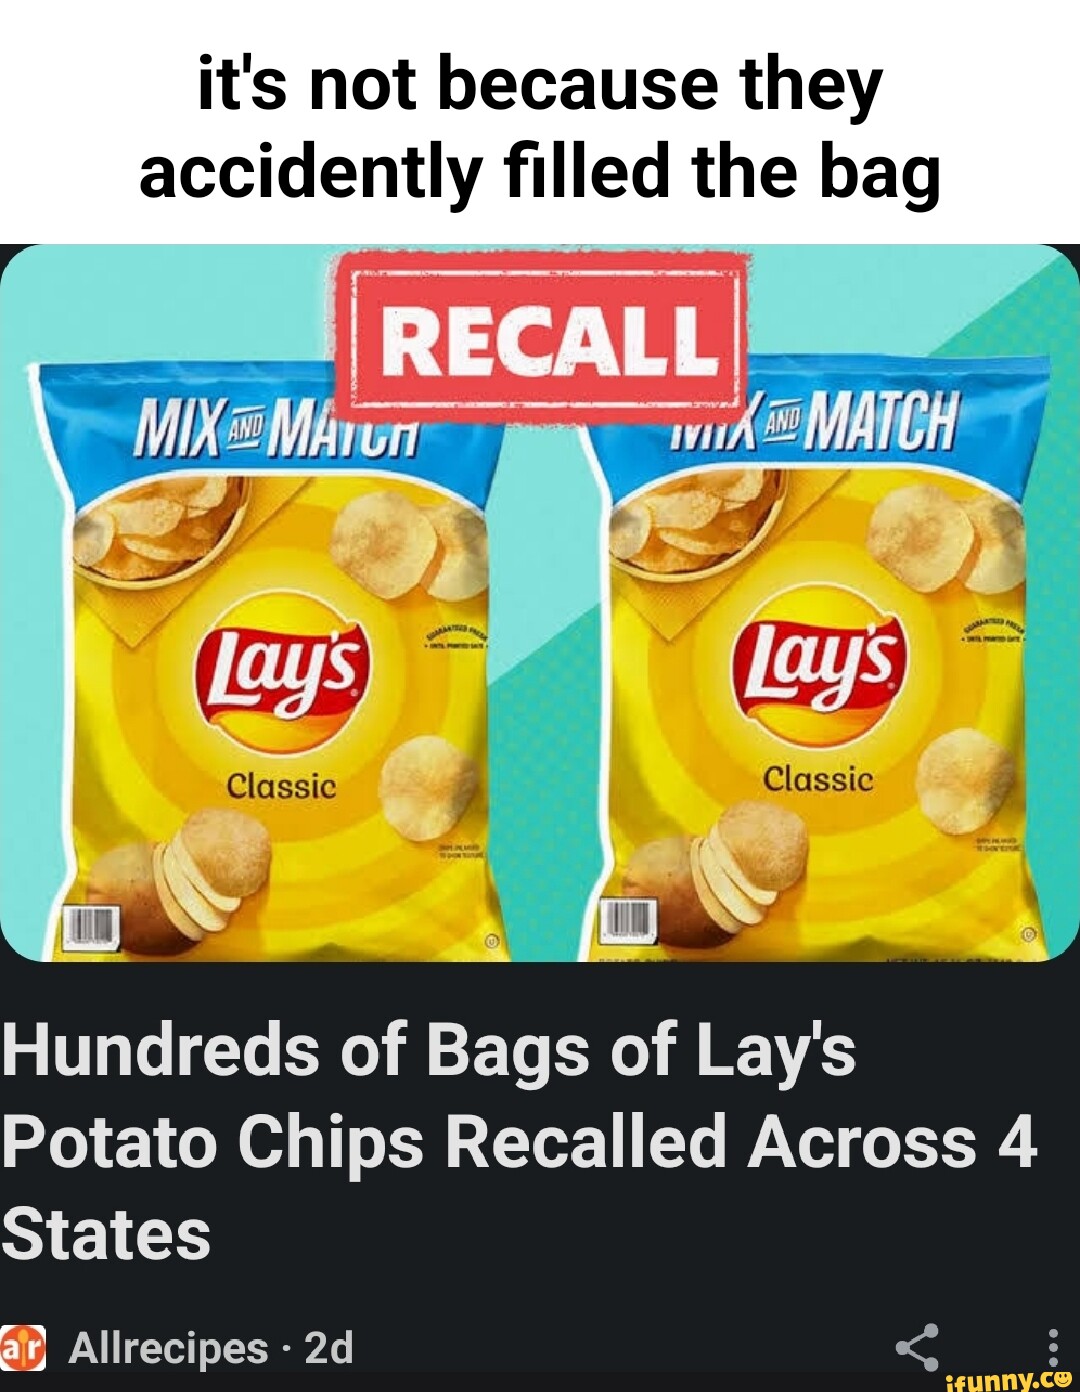 It's not because they accidently filled the bag RECALL MACH I Hundreds